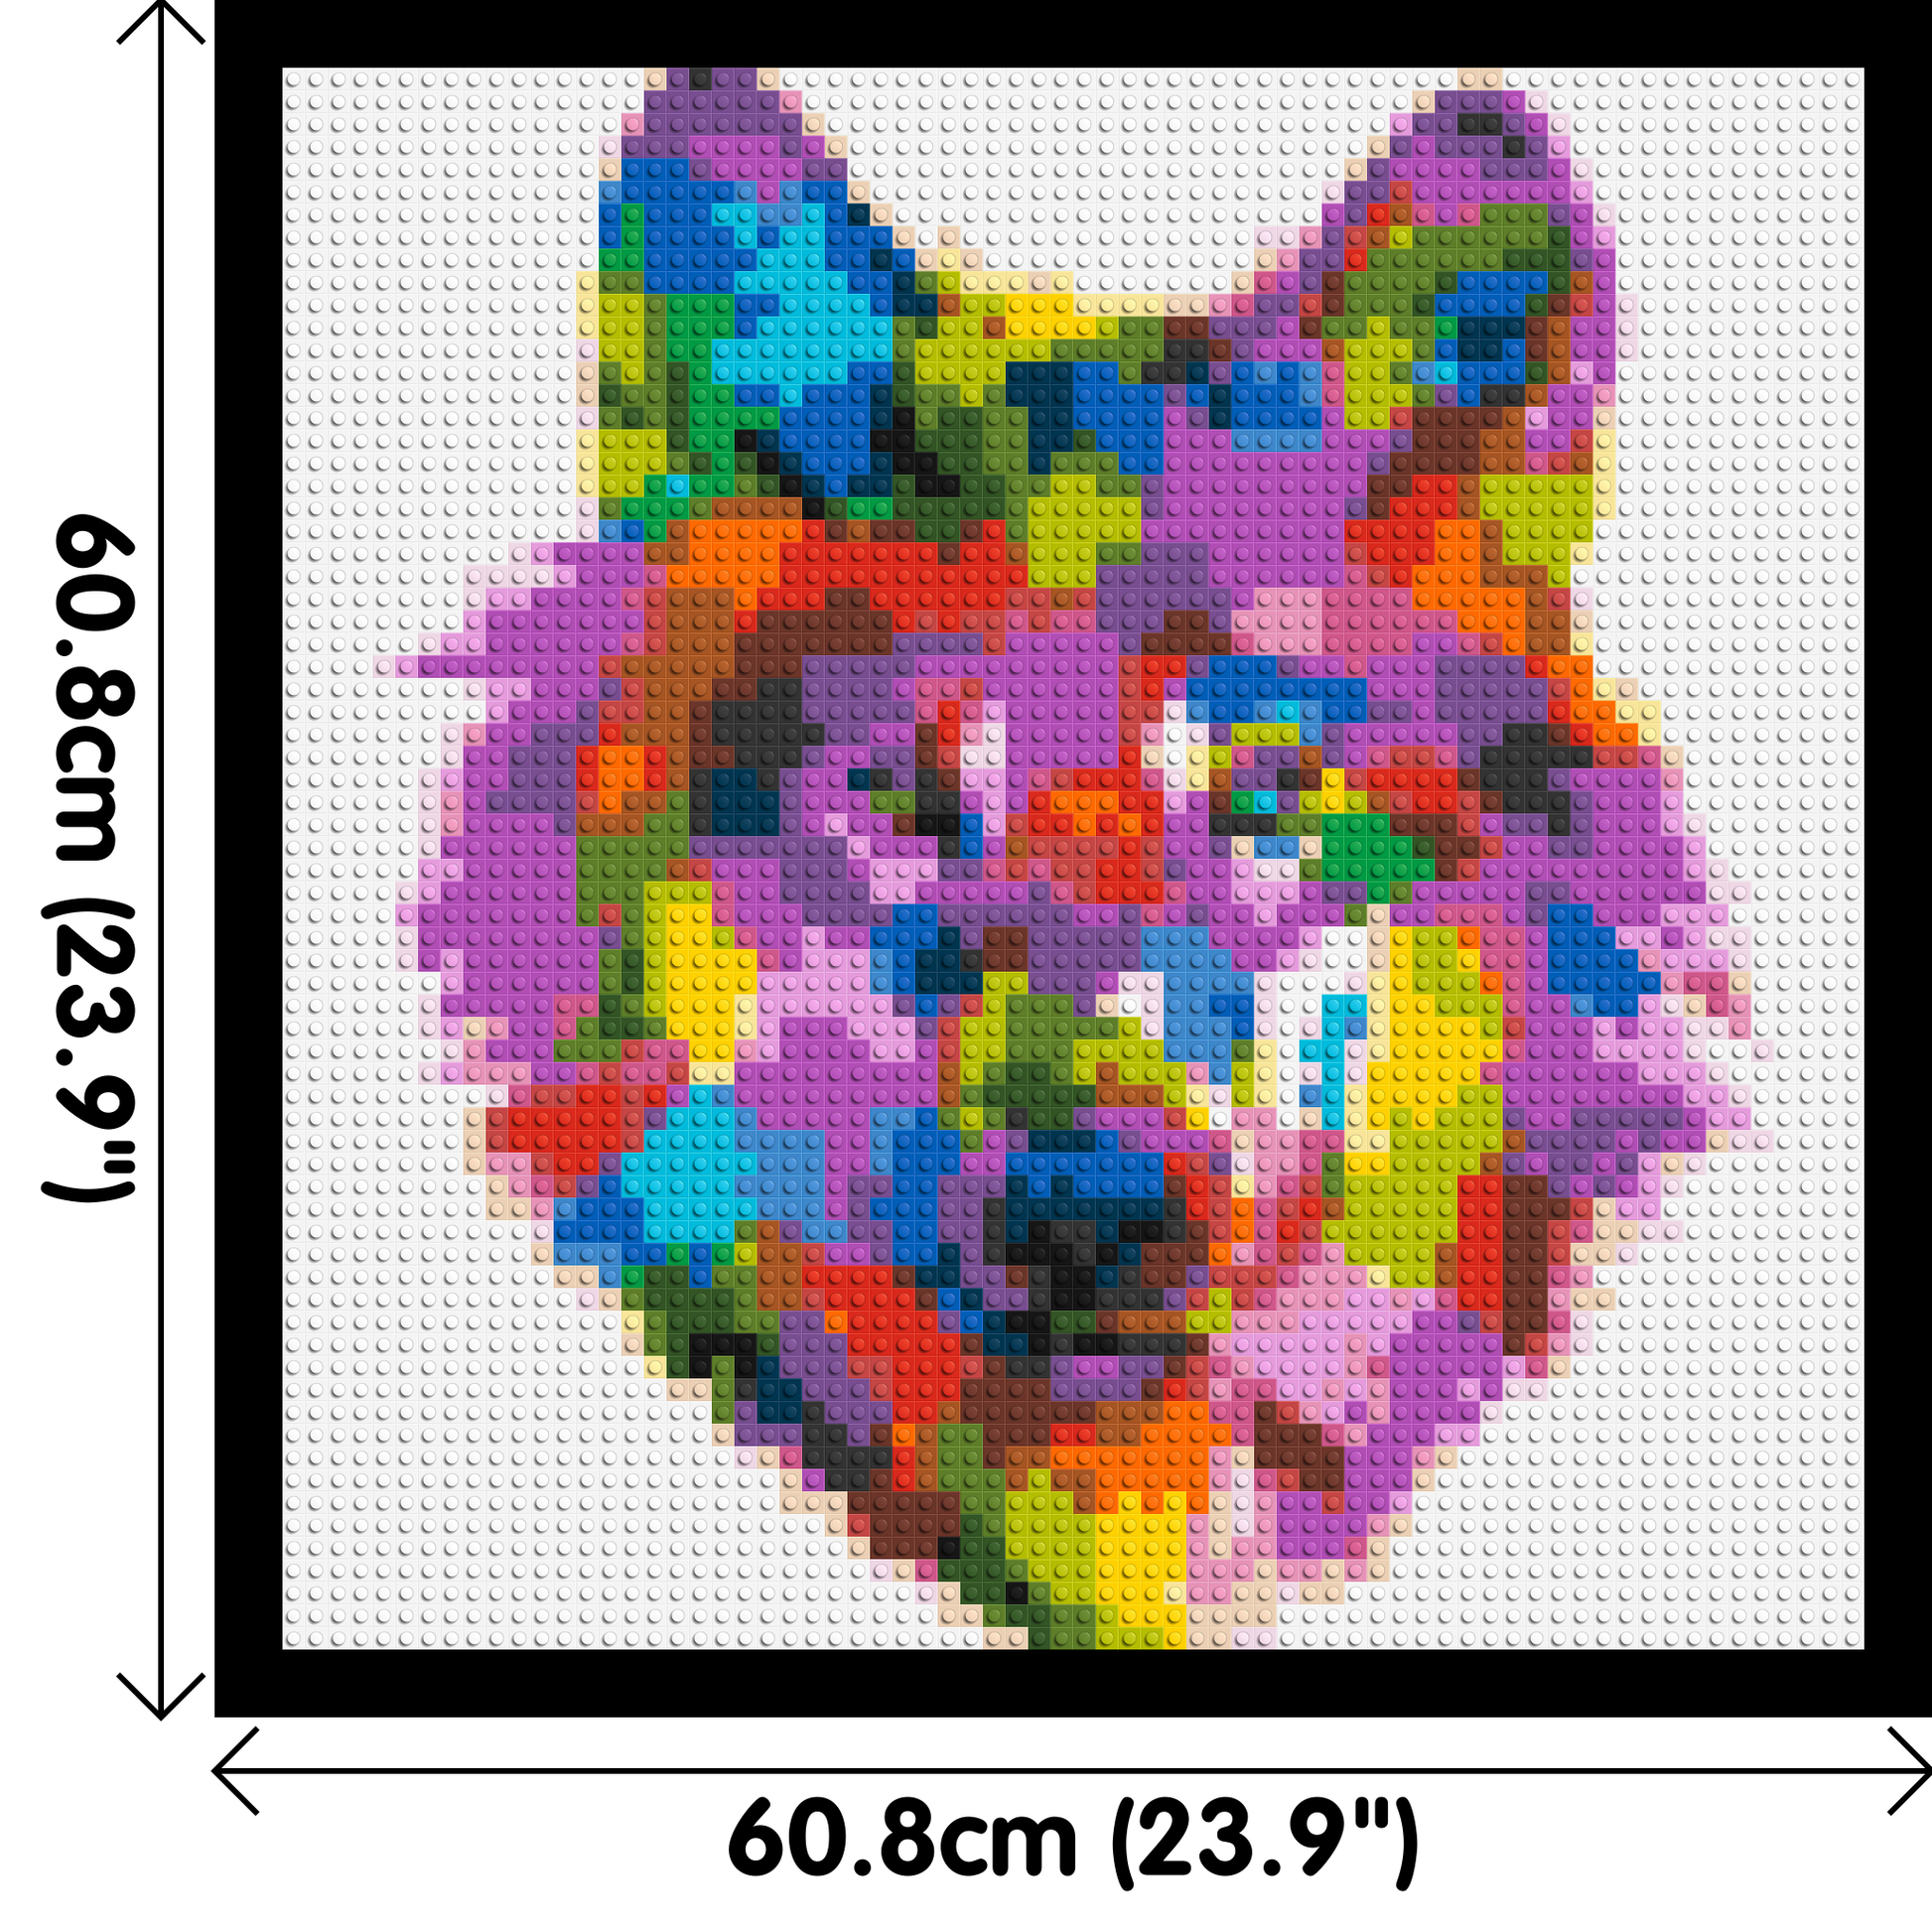 Wolf Colourful Pop Art - Brick Art Mosaic Kit 3x3 dimensions with frame